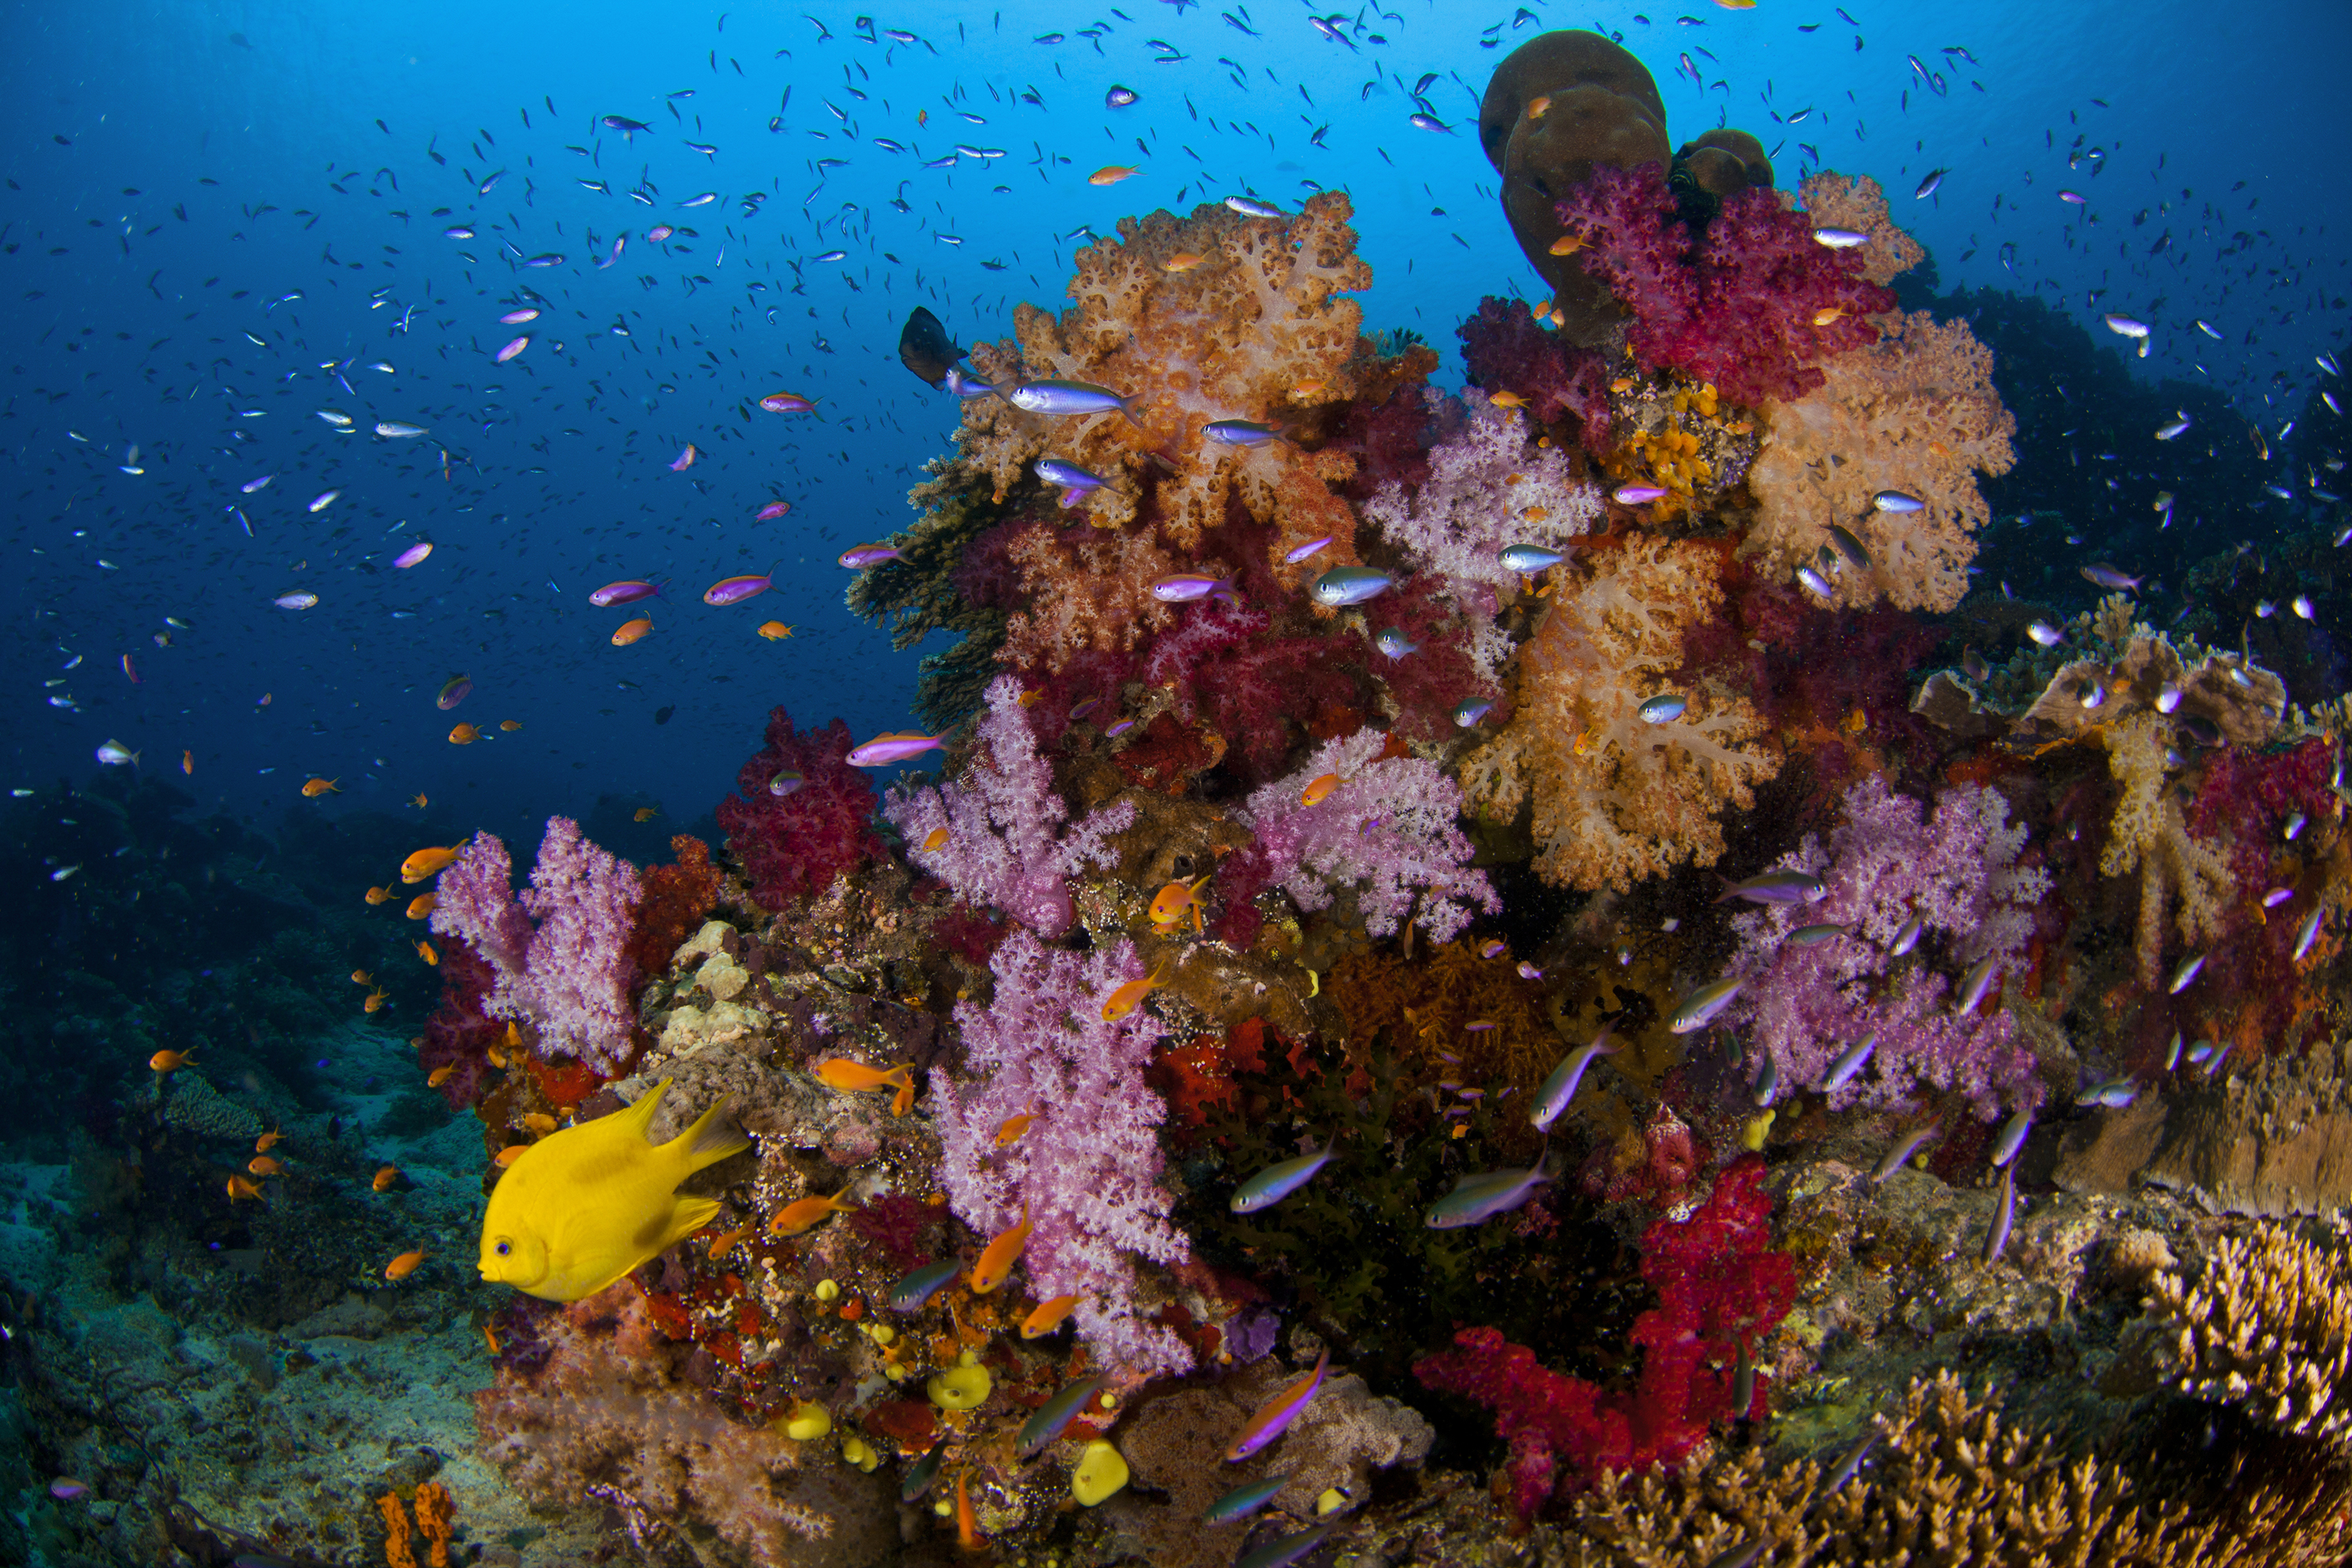 At a lively reef where fishing is banned, corals thrive, and fish eat seaweed that would otherwise vastly outcompete and endanger the corals. Fisheries regulations appear to protect reefs and may buy some insurance against mass coral death in ocean warming events. But even protected reefs die off if their waters get too hot too long. Credit: Georgia Tech / Hay lab